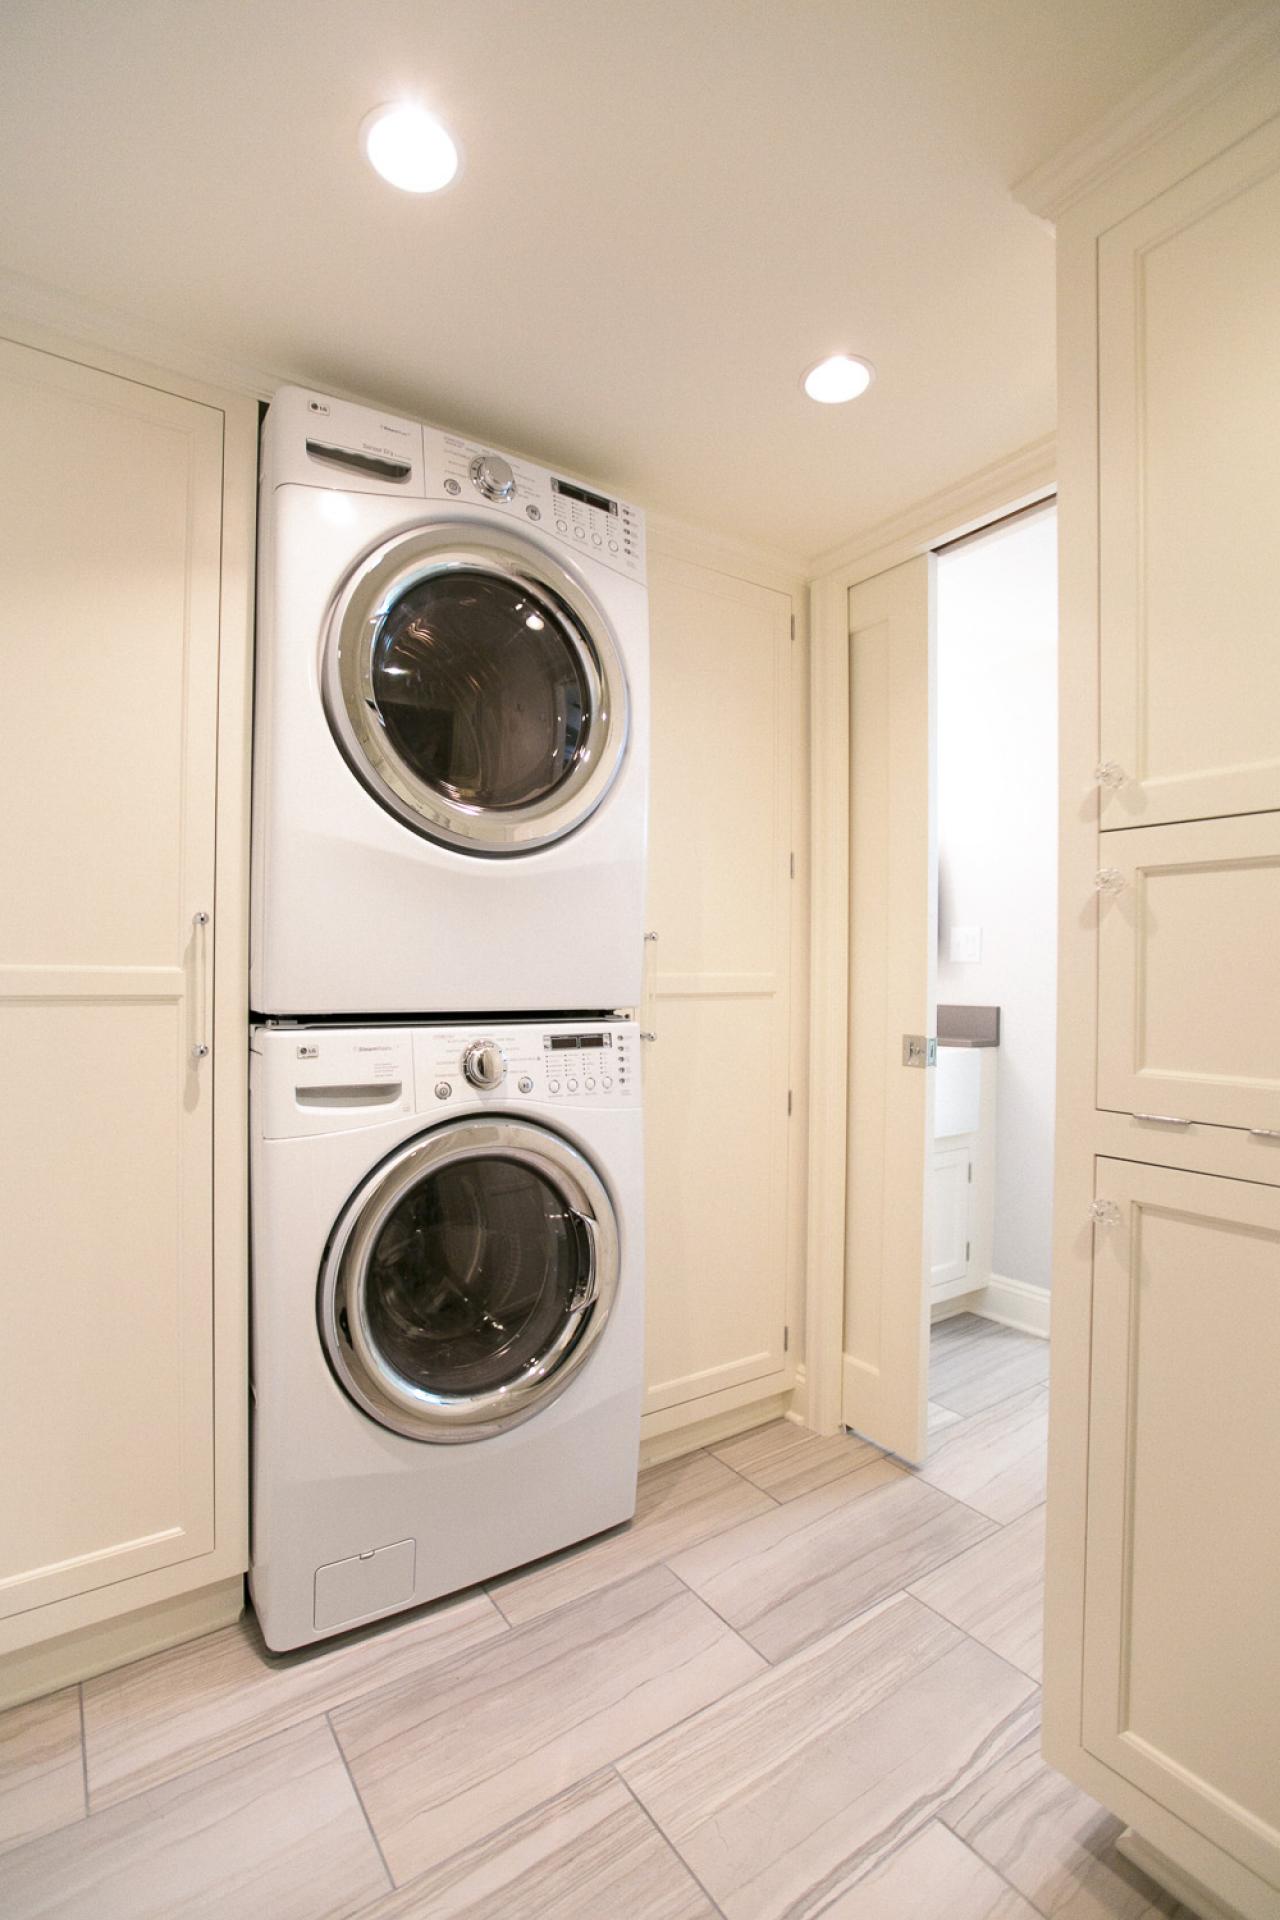 Stacked Washer  and Dryer  Units in Laundry  Room  HGTV